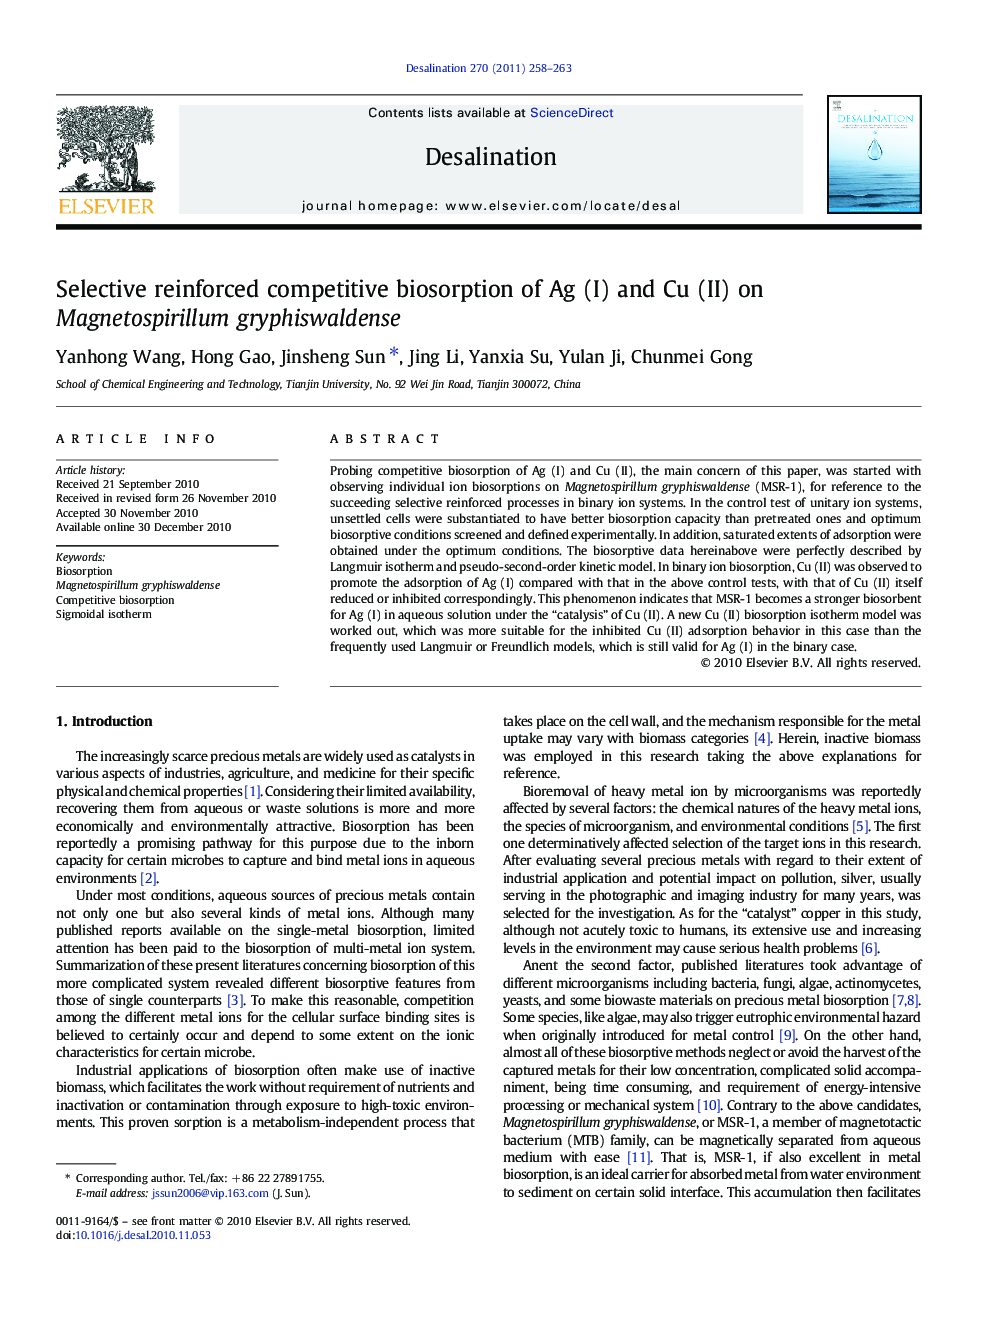 Selective reinforced competitive biosorption of Ag (I) and Cu (II) on Magnetospirillum gryphiswaldense